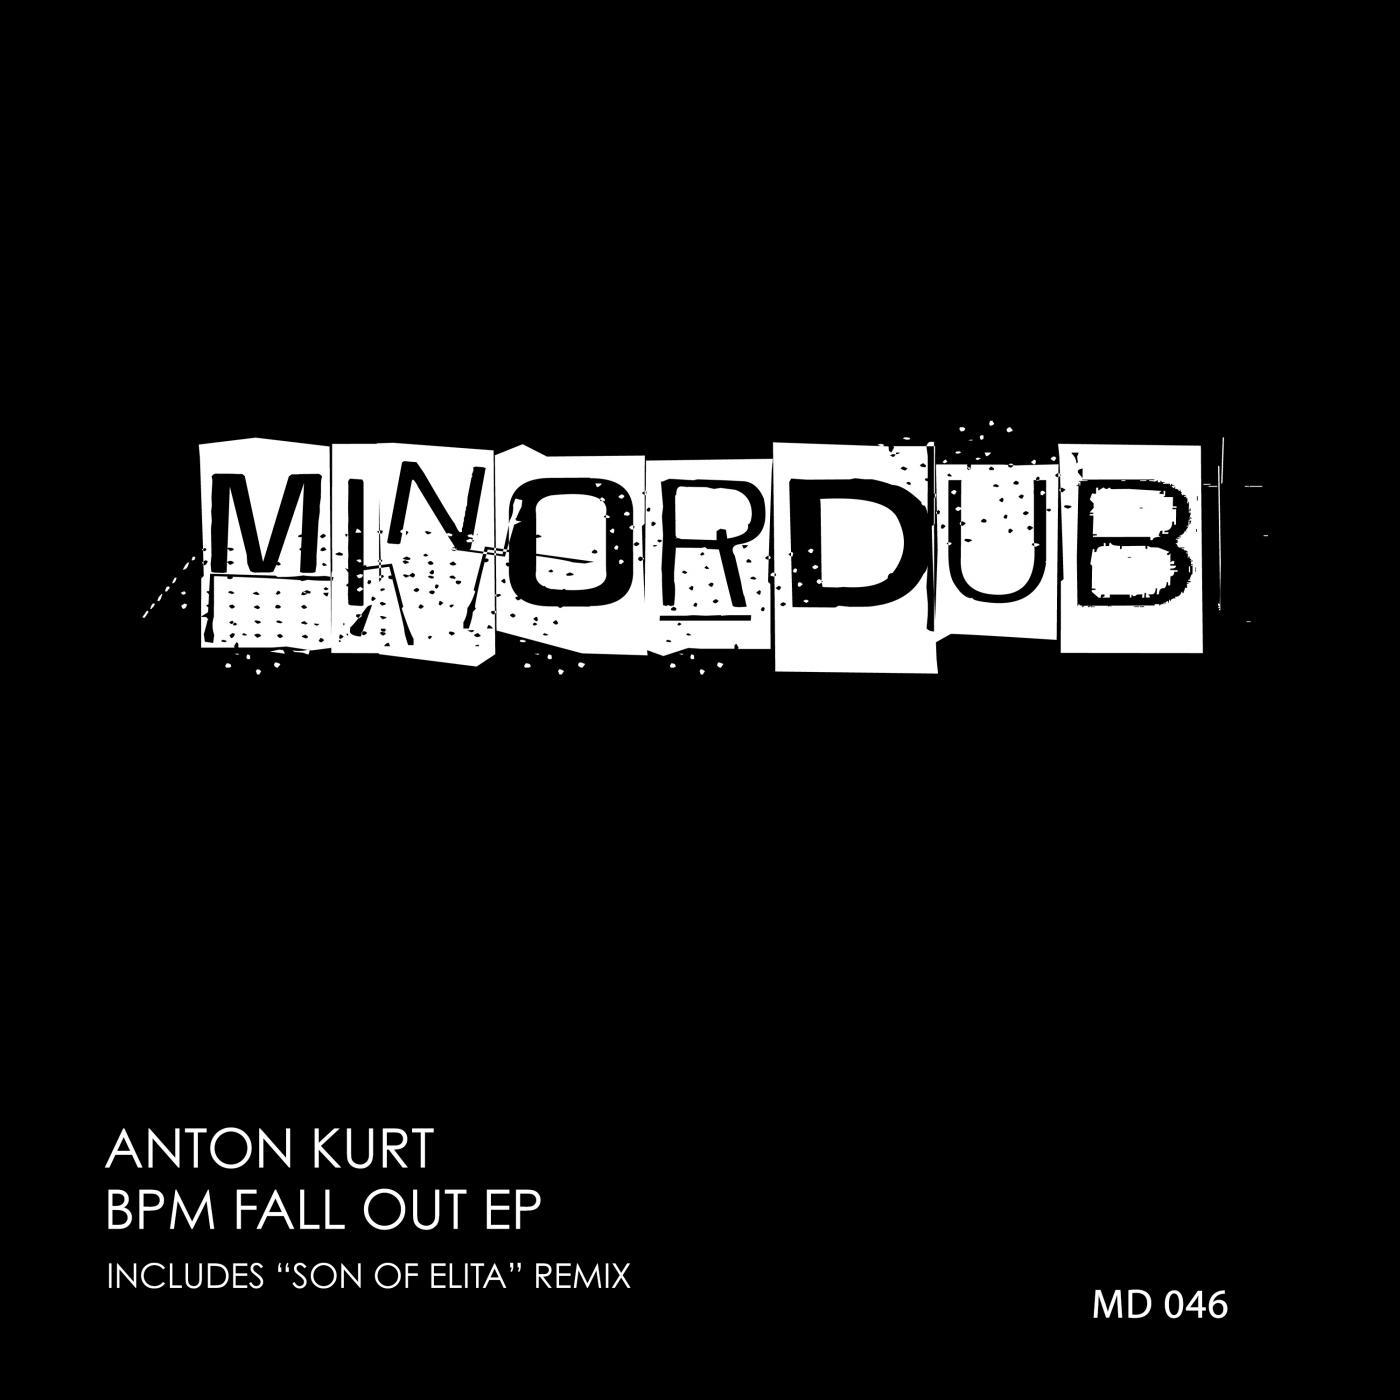 BPM FALL OUT EP